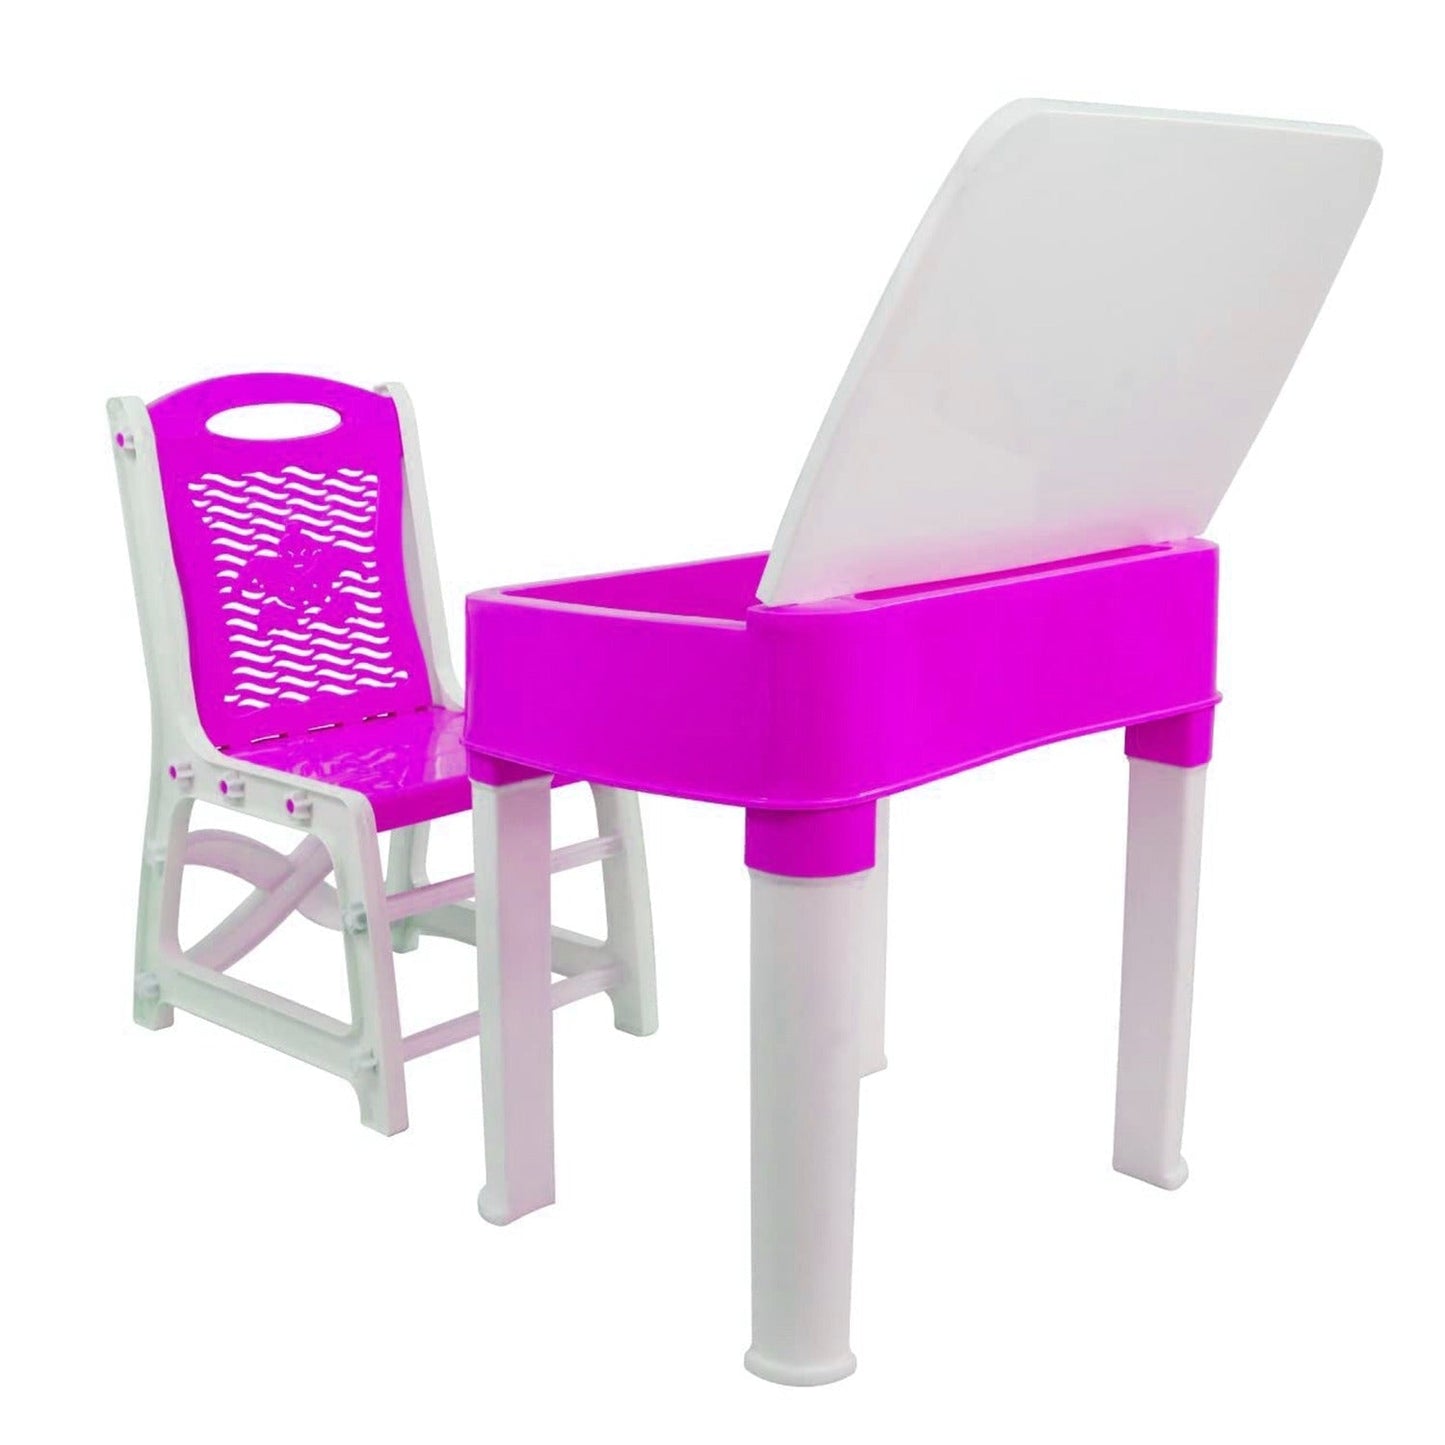 Study Table And Chair Set For Boys And Girls With Small Box Space For Pencils Plastic High Quality Study Table (Pink)